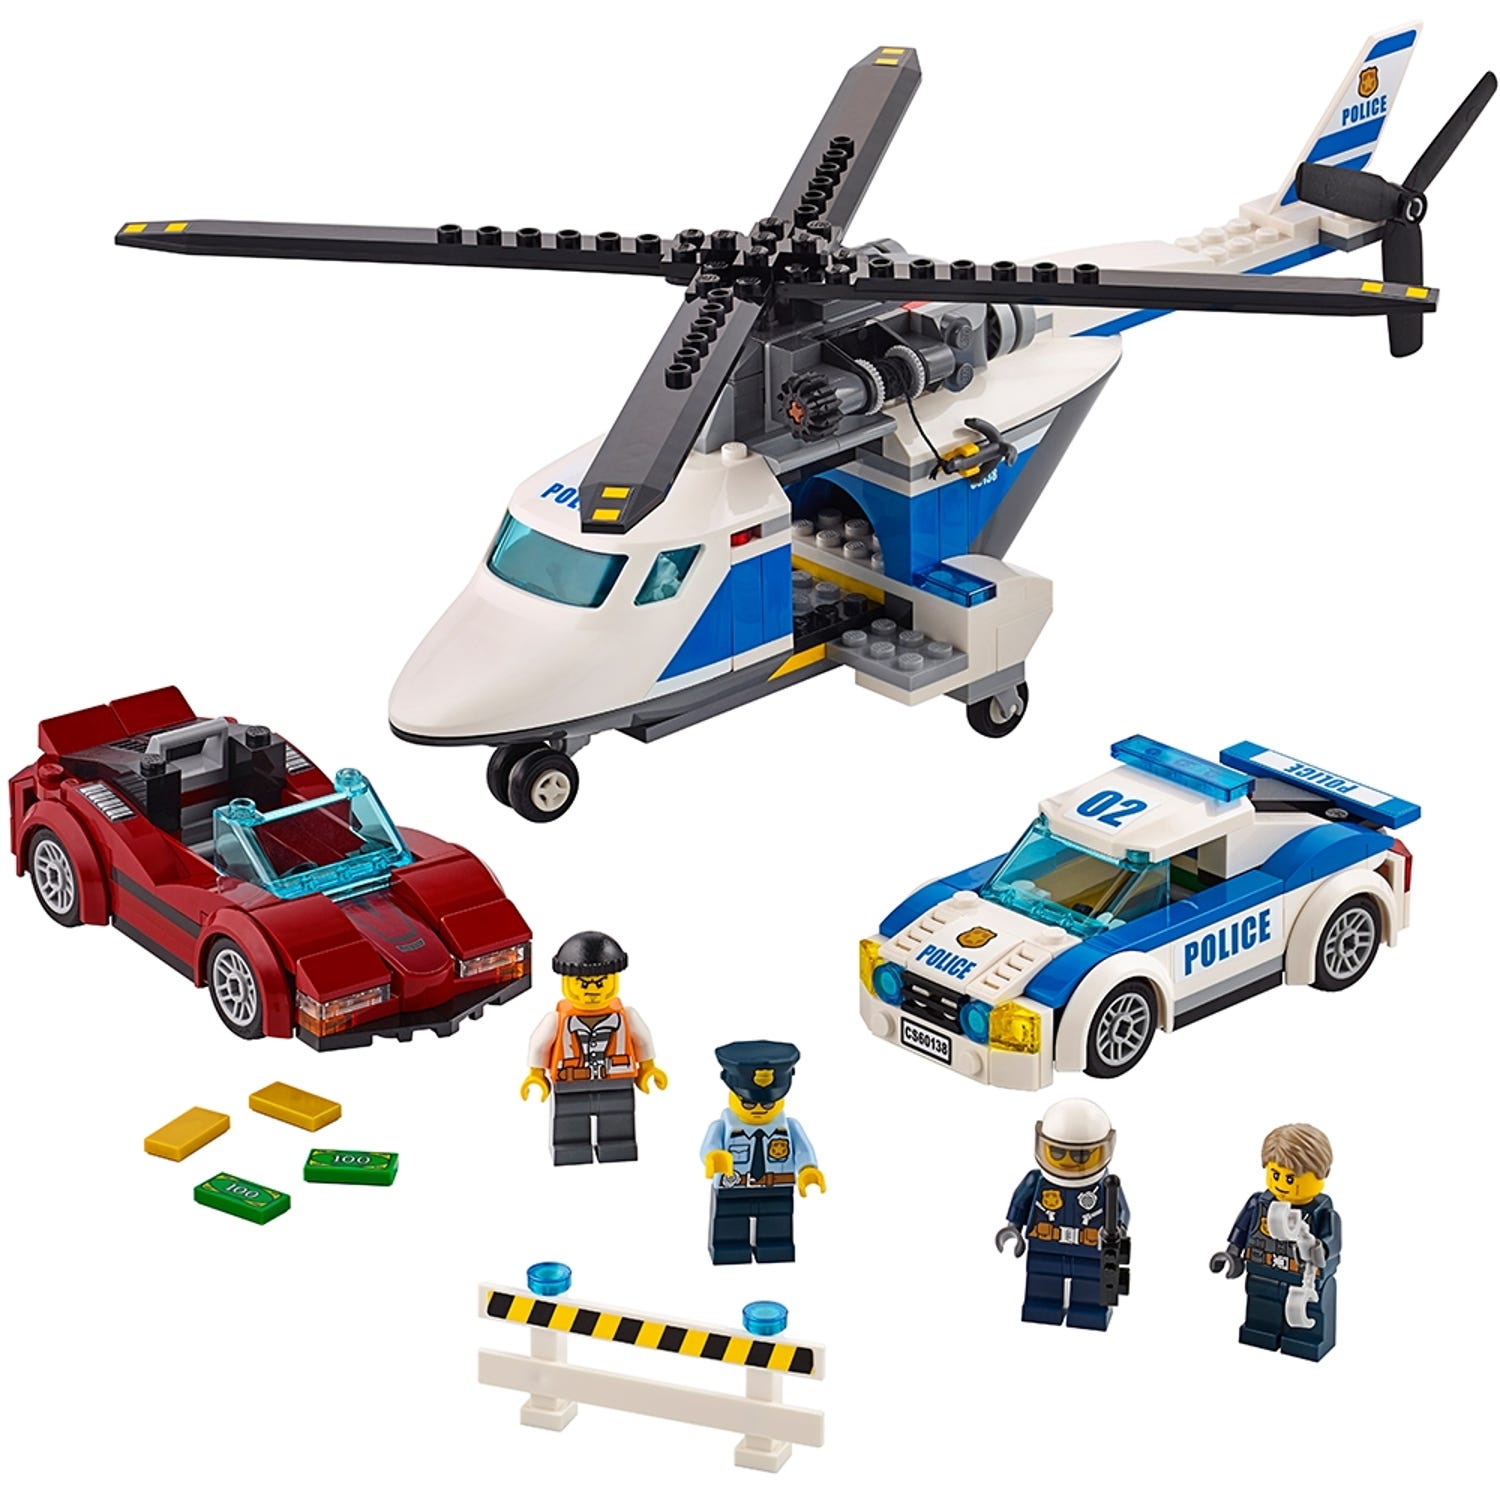 High-speed Chase 60138 | City | Buy Official LEGO® Shop US